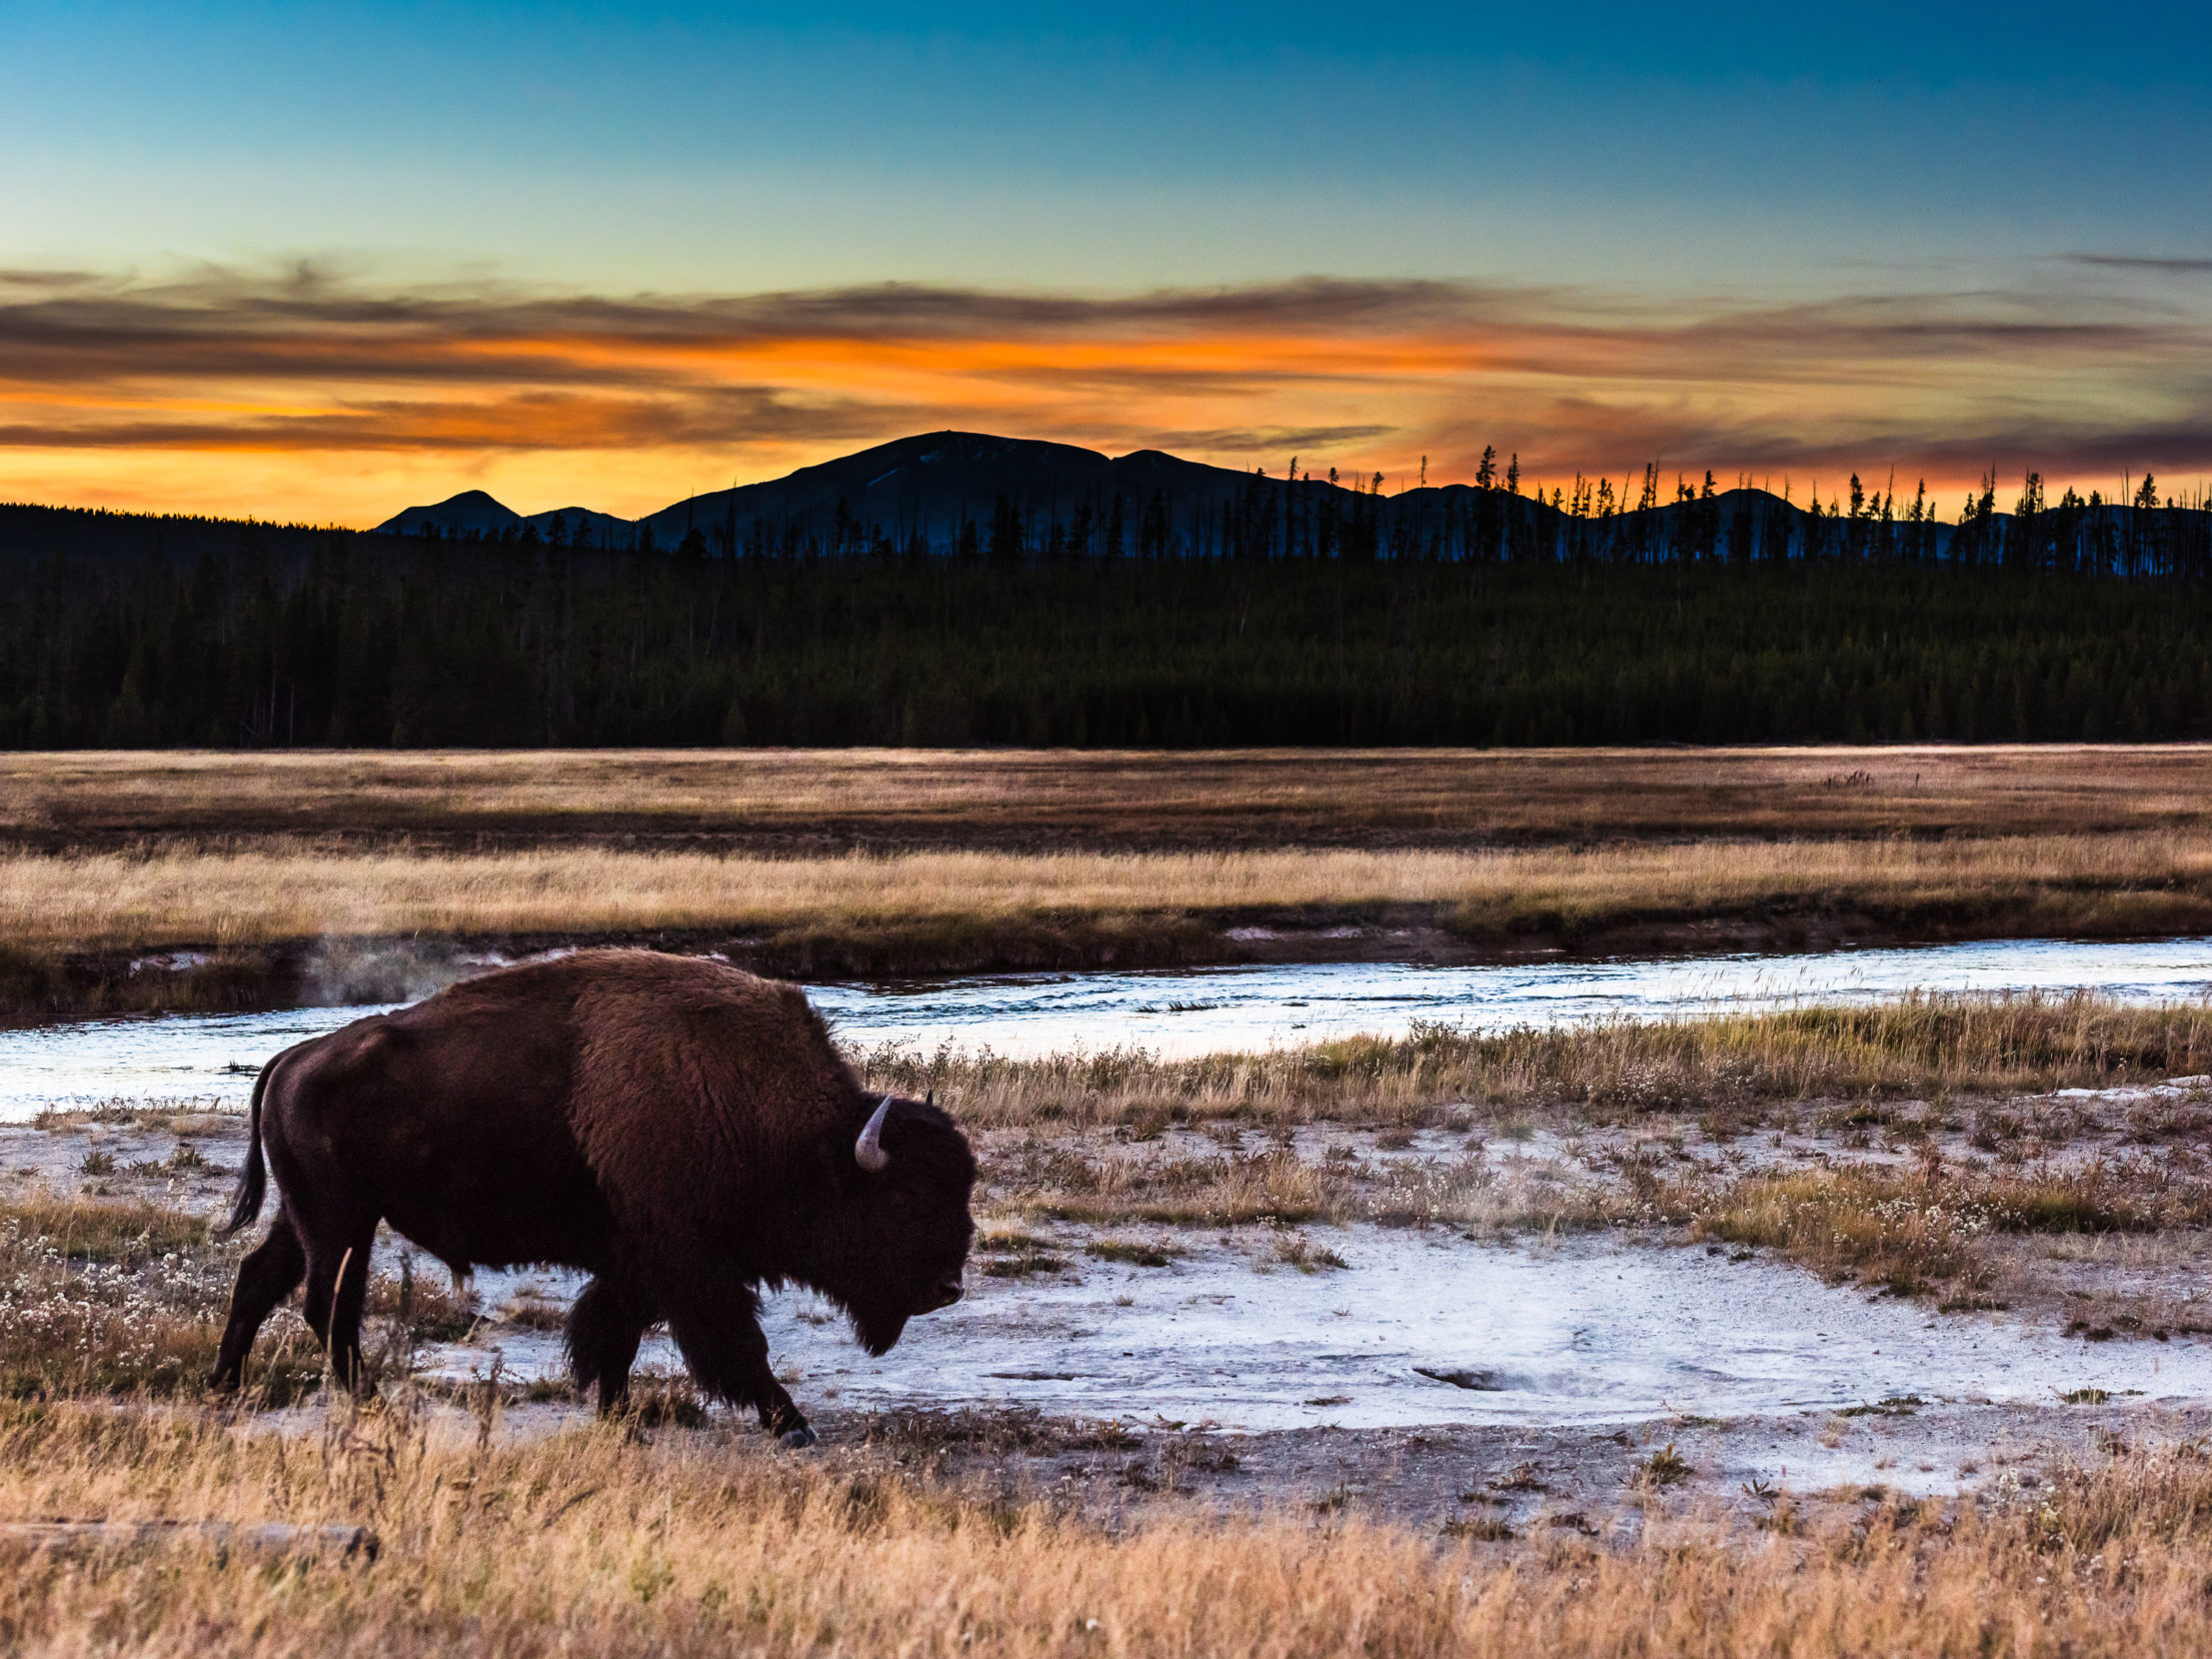 In 2016, Congress passed legislation proclaiming the bison as the U.S.’s first national mammal — more than a century after the species teetered on the brink of extinction. Today, roughly half a million bison roam on tribal, public, and private lands across the country. Photo: Sivani Babu.